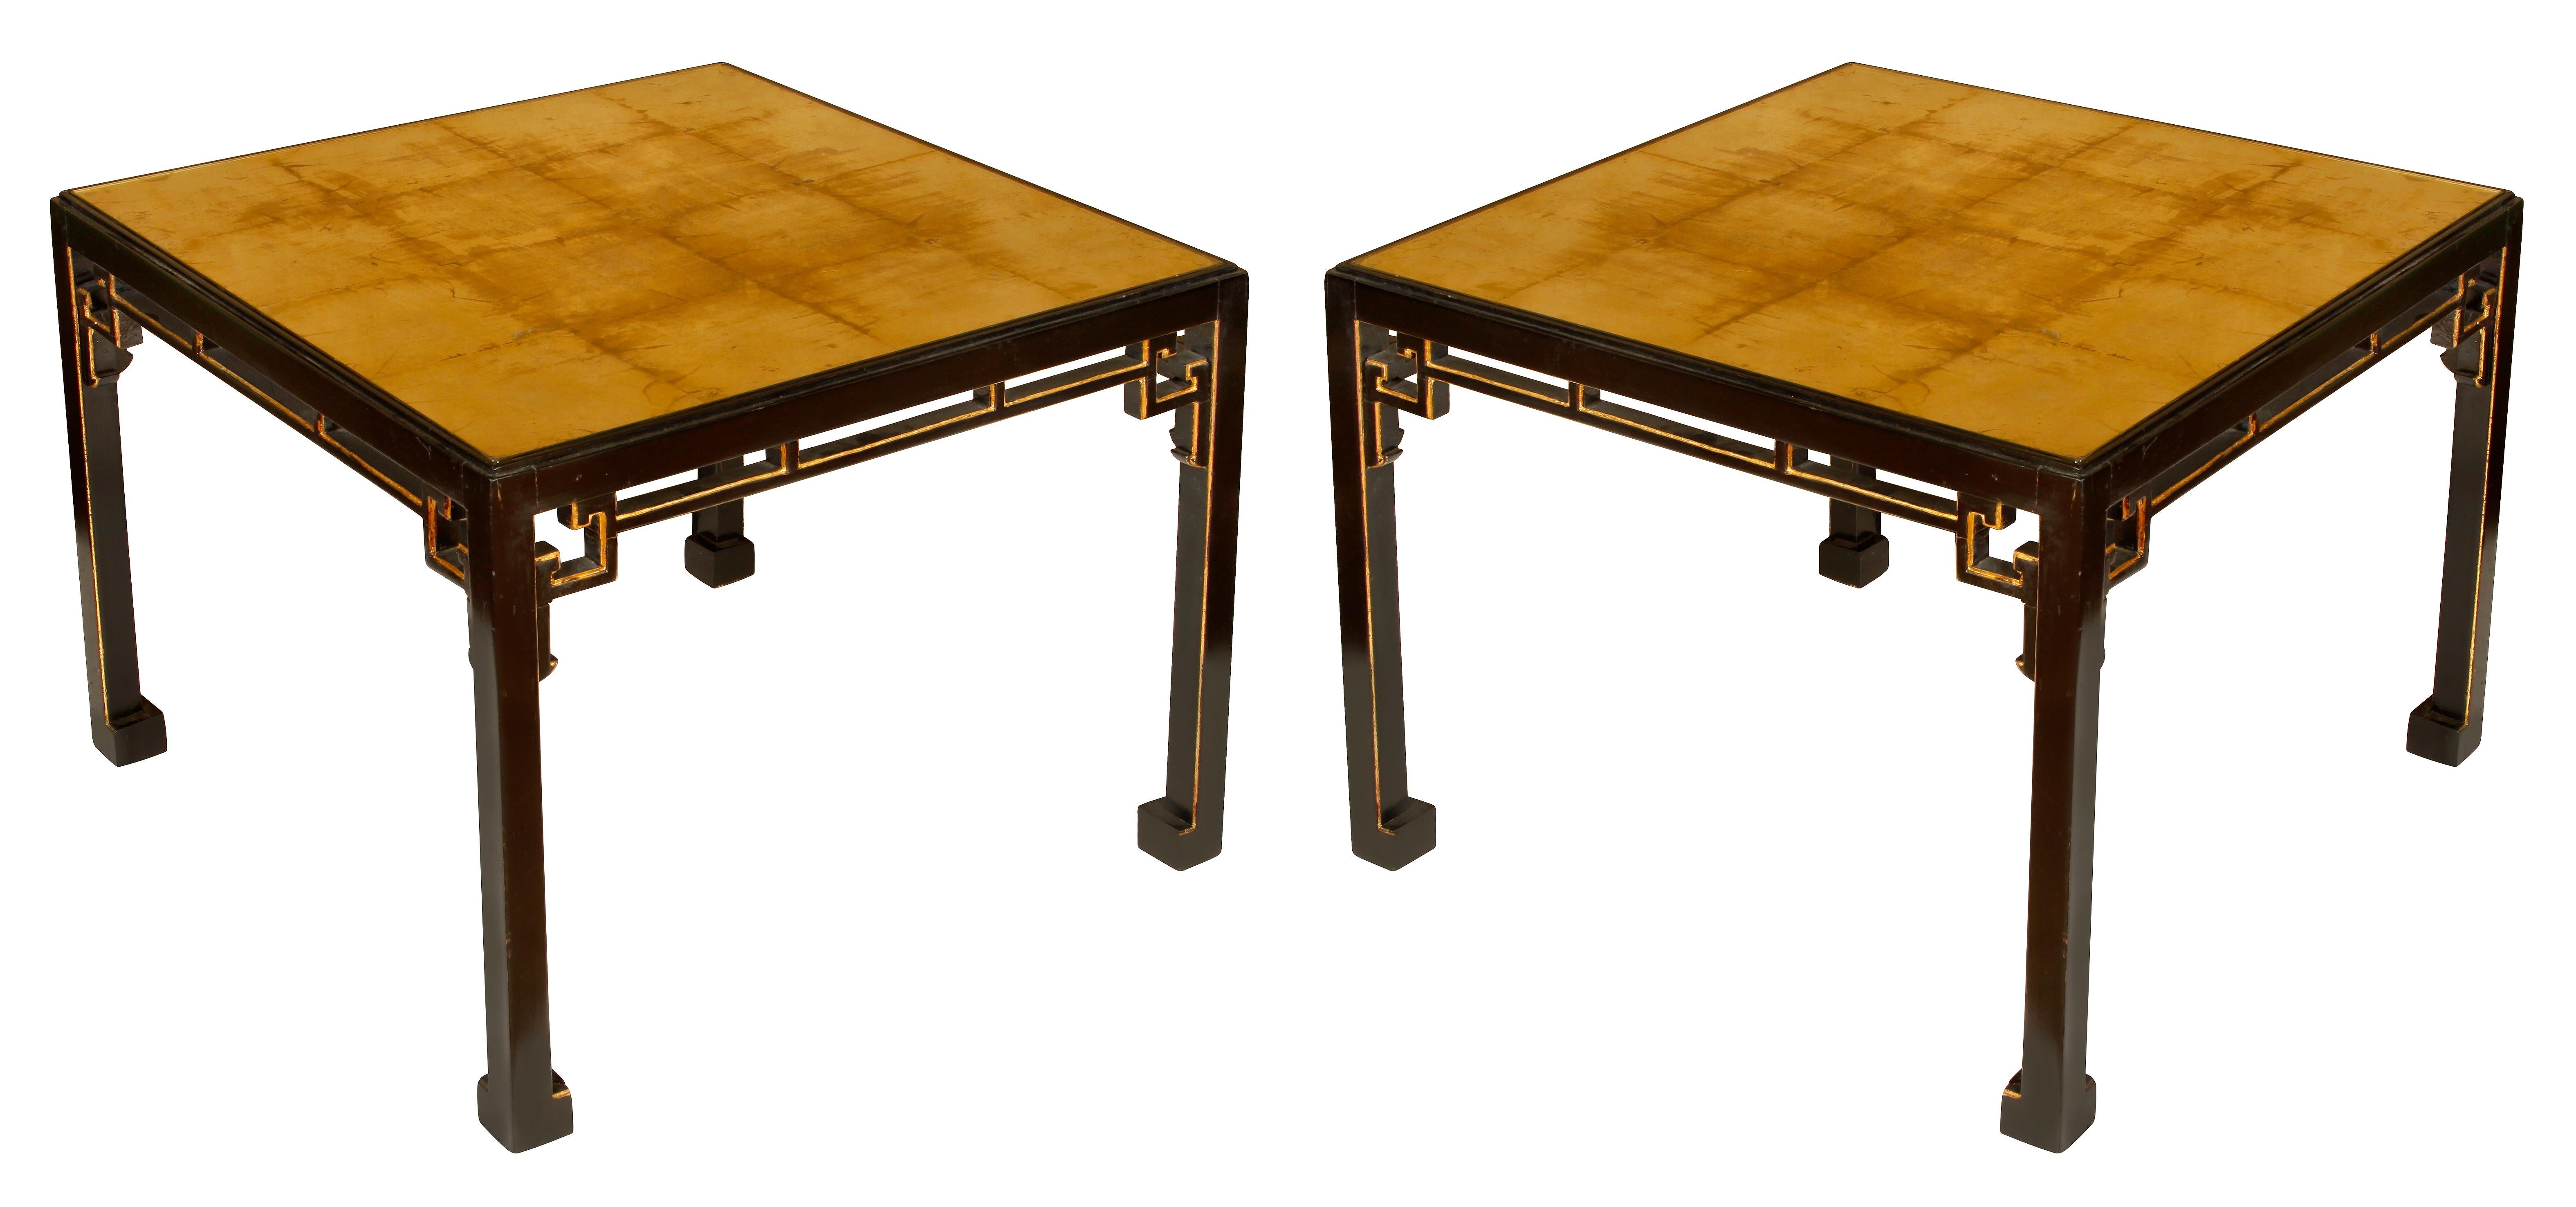 A pair of gilt and antiqued mirror top side tables in the style of James Mont. Black table legs in Chinese inspired shape with gilt detail.